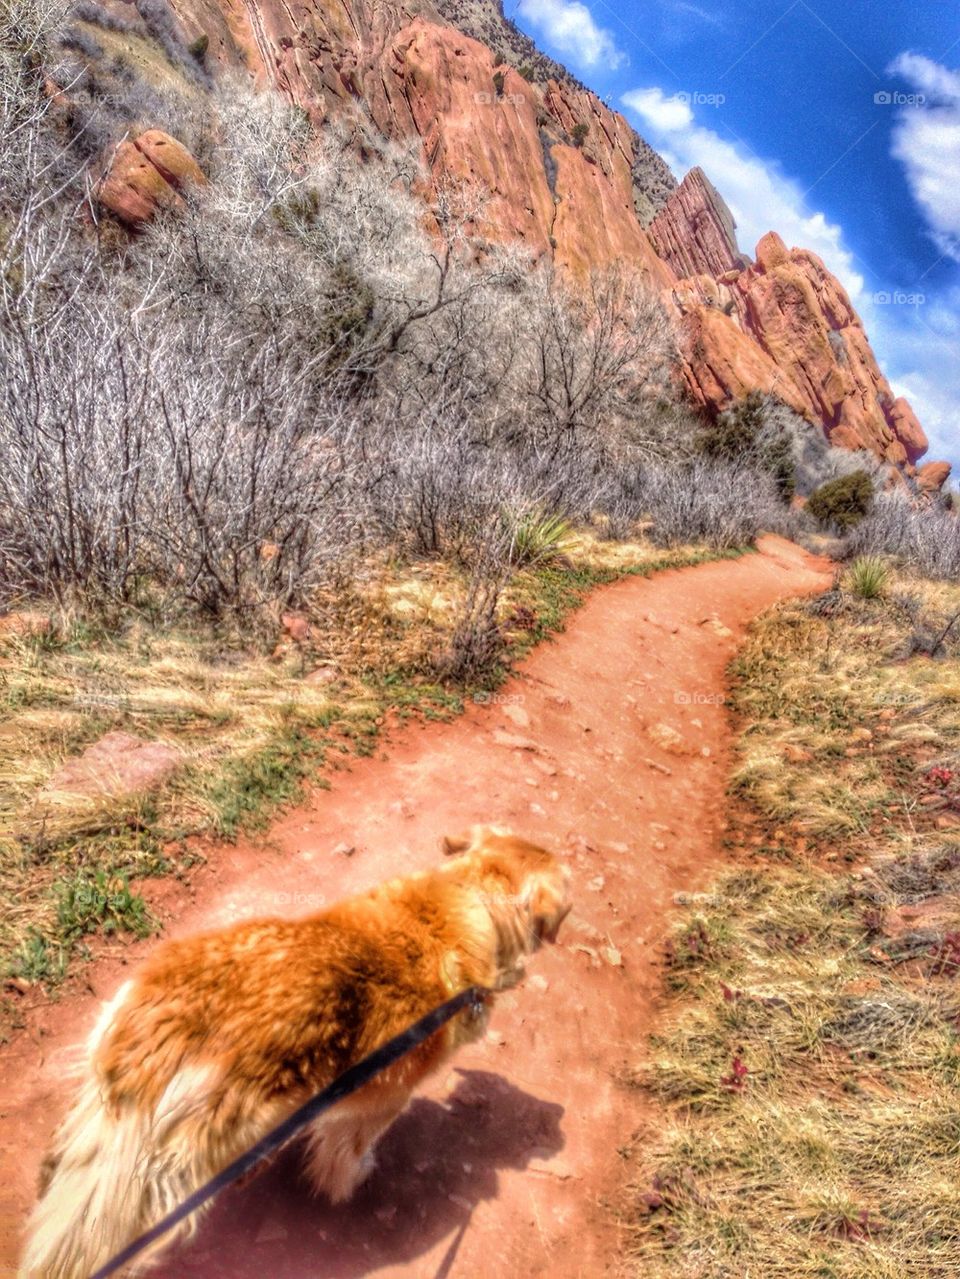 Red Rock Path